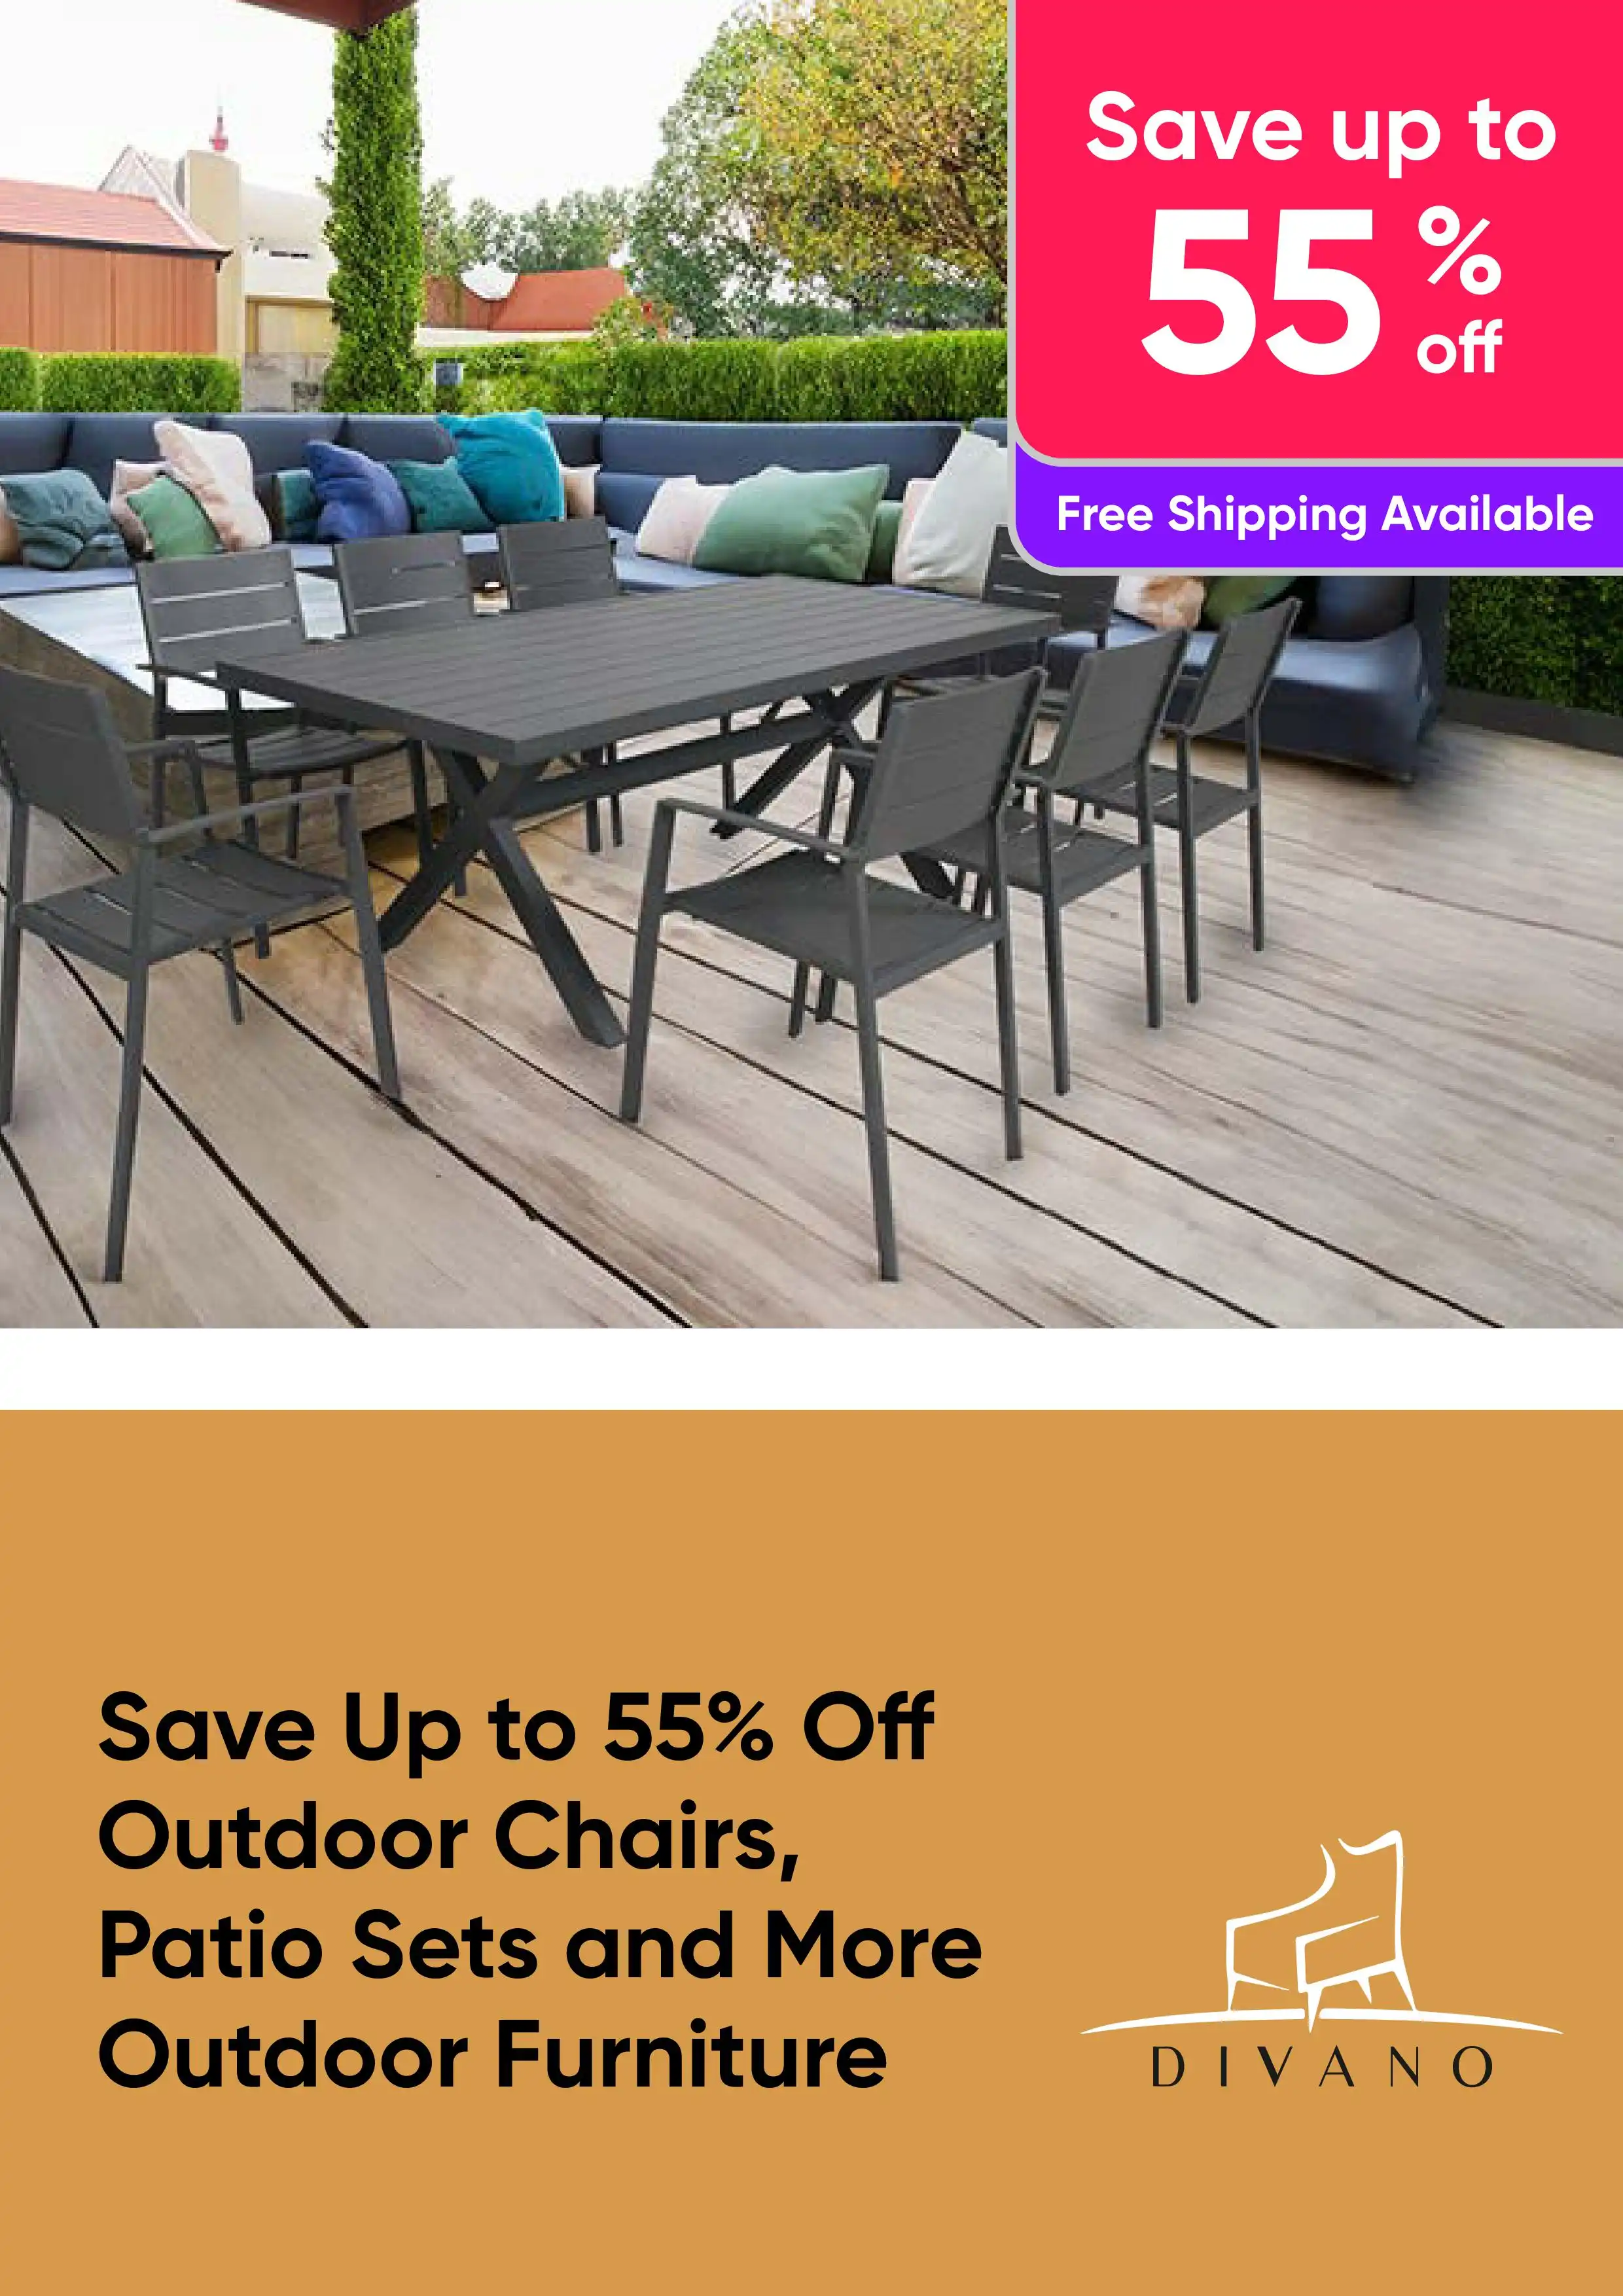 Save Up to 55% Off Outdoor Chairs, Patio Sets and More Outdoor Furniture by Divano